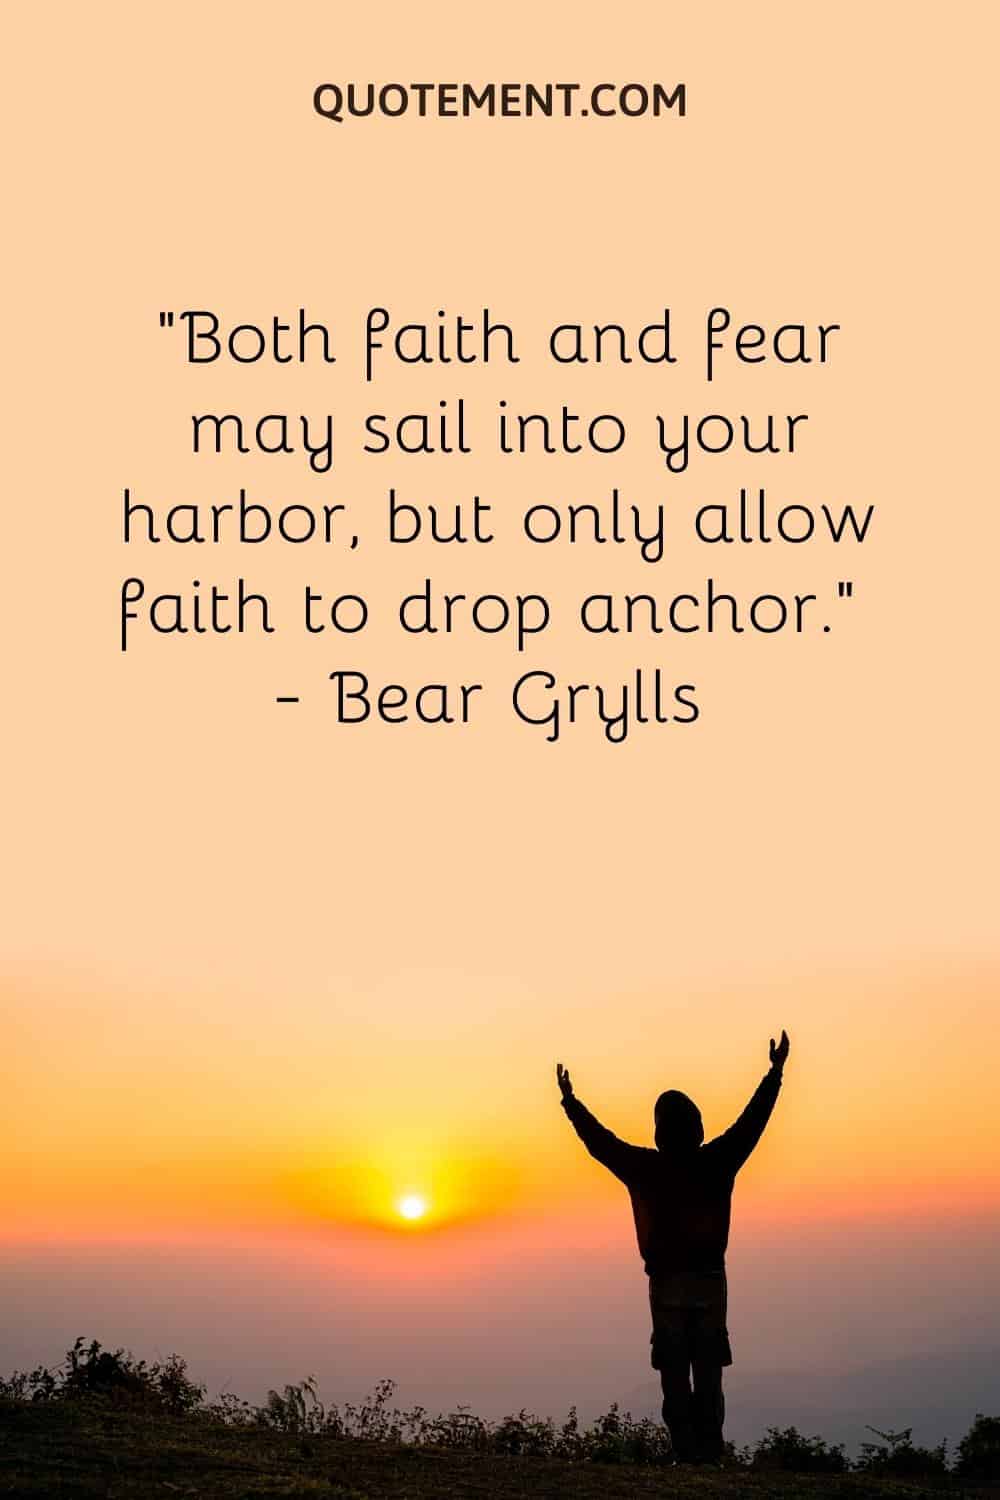 “Both faith and fear may sail into your harbor, but only allow faith to drop anchor.” — Bear Grylls